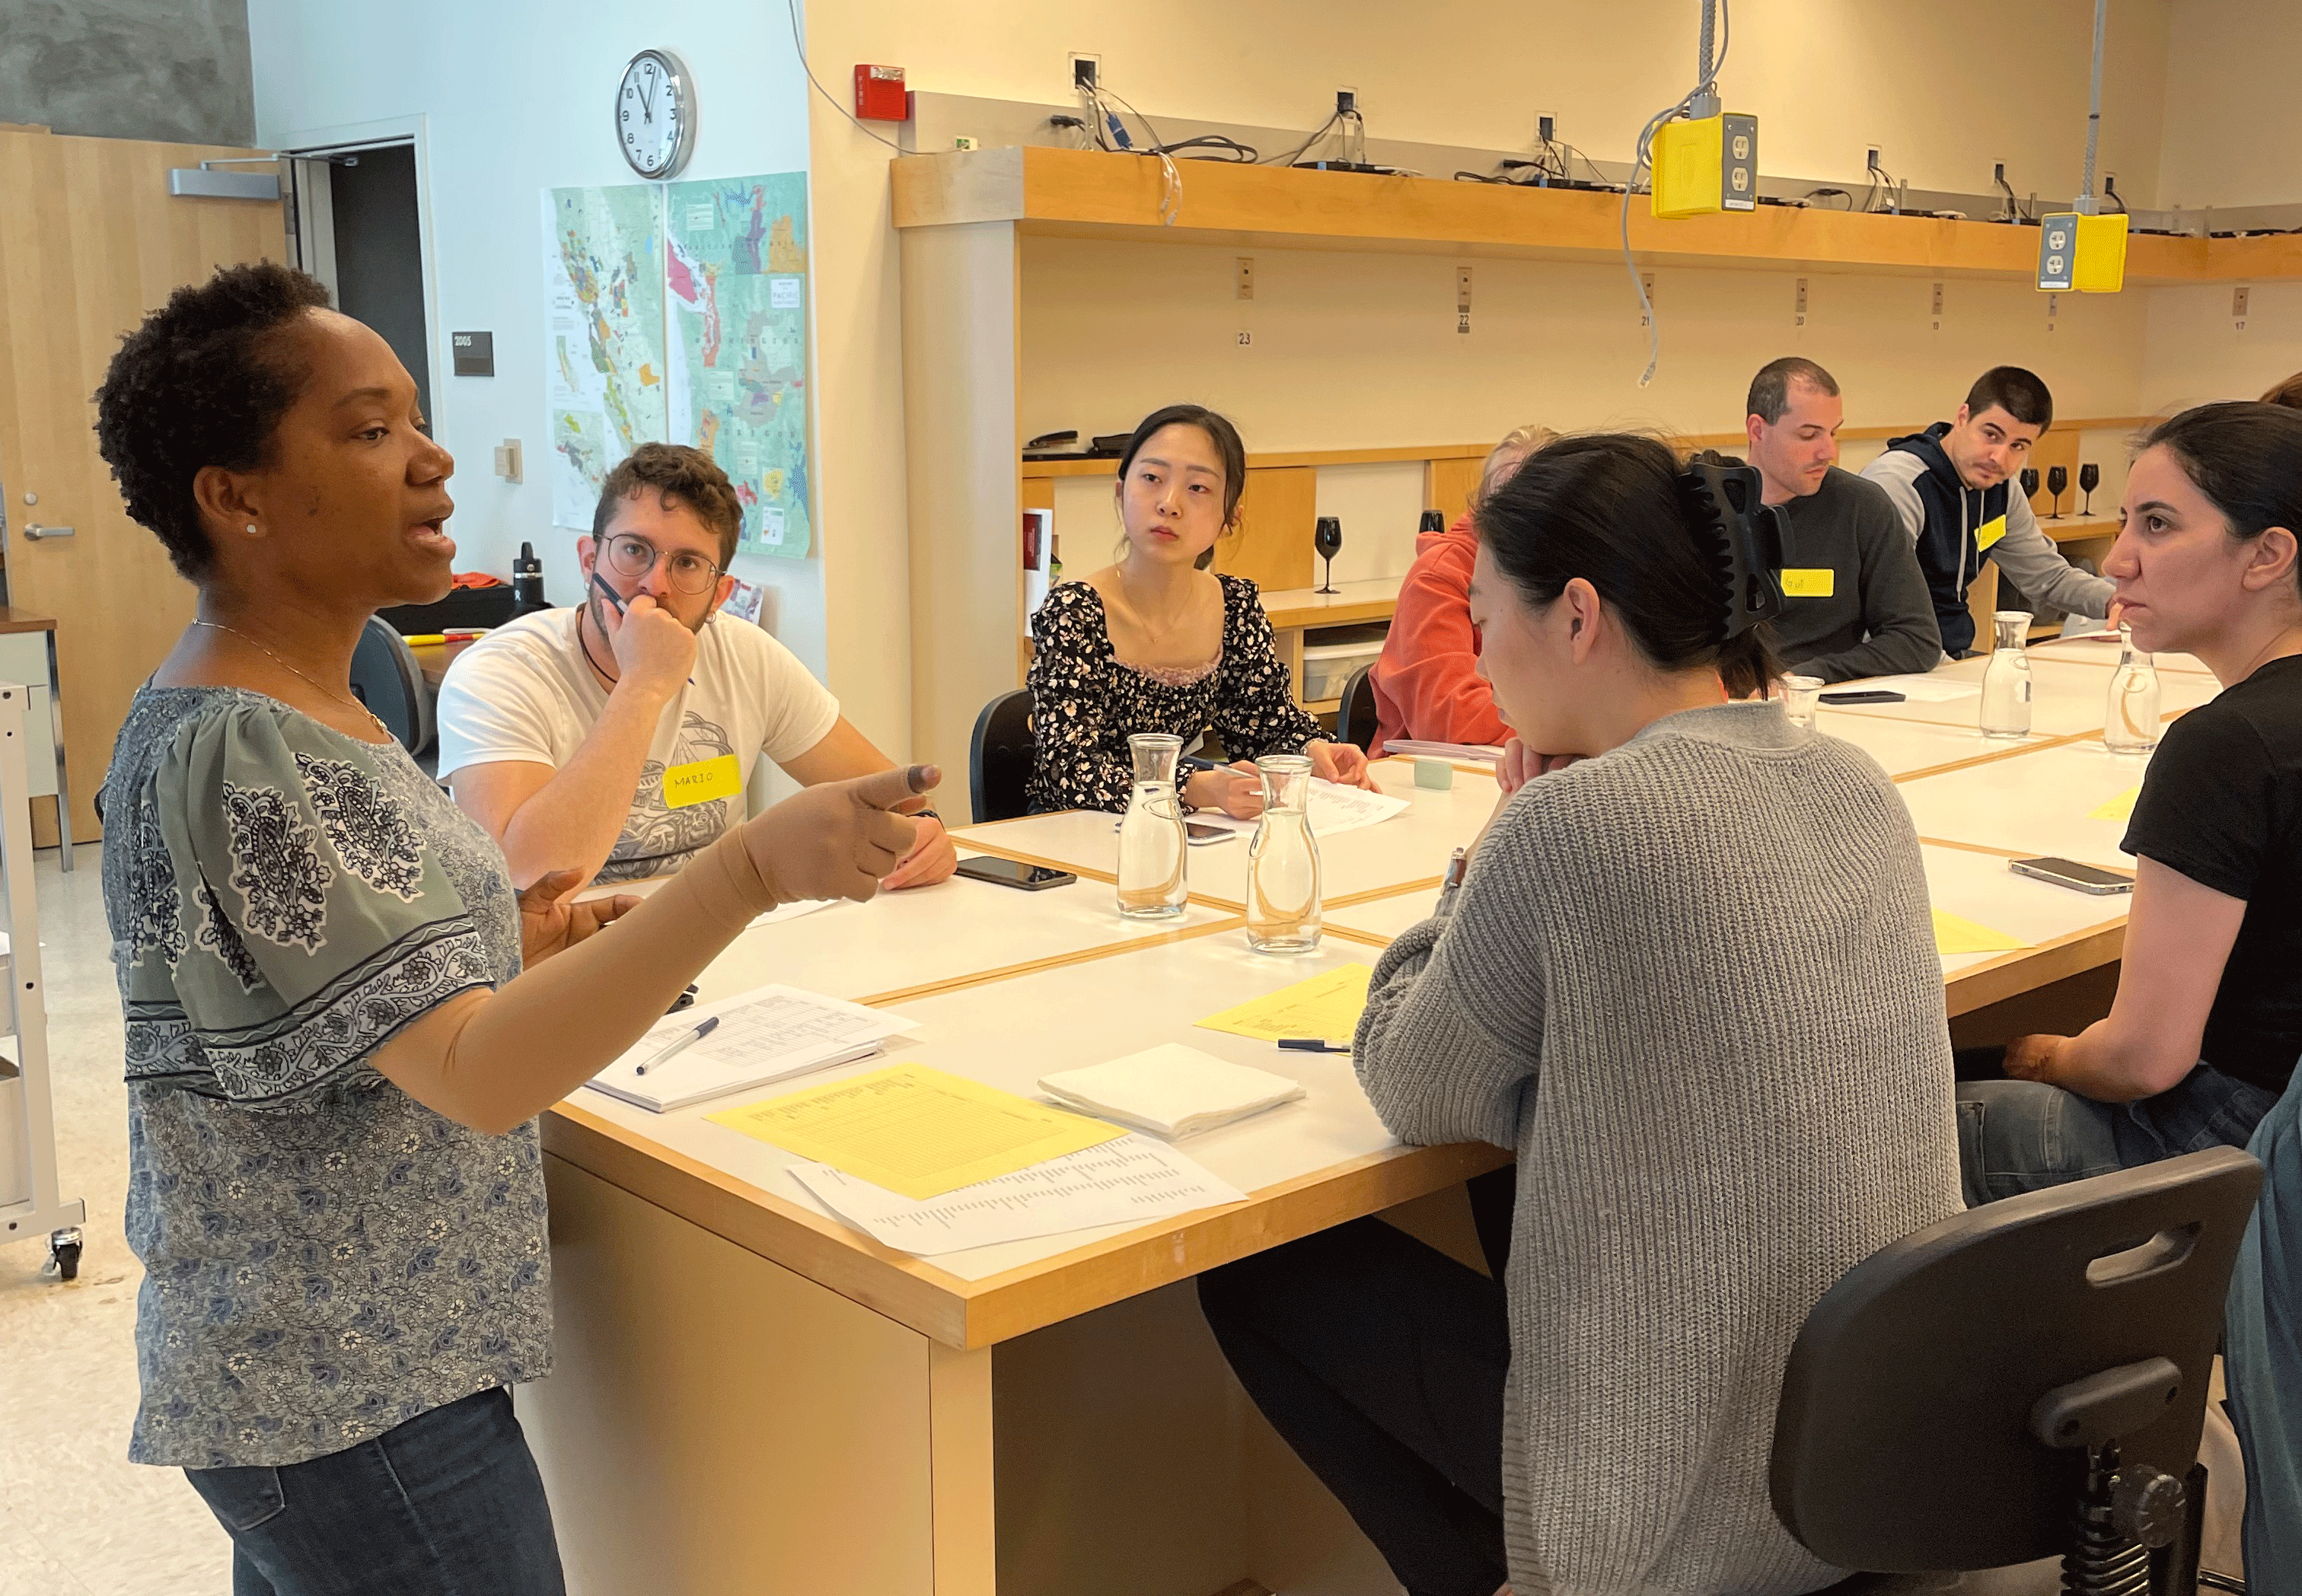 Gaelle Chanlot Delarue (left) leads a training session with the sensory panel as part of a new honey research project. (Tiffany Dobbyn/UC Davis)